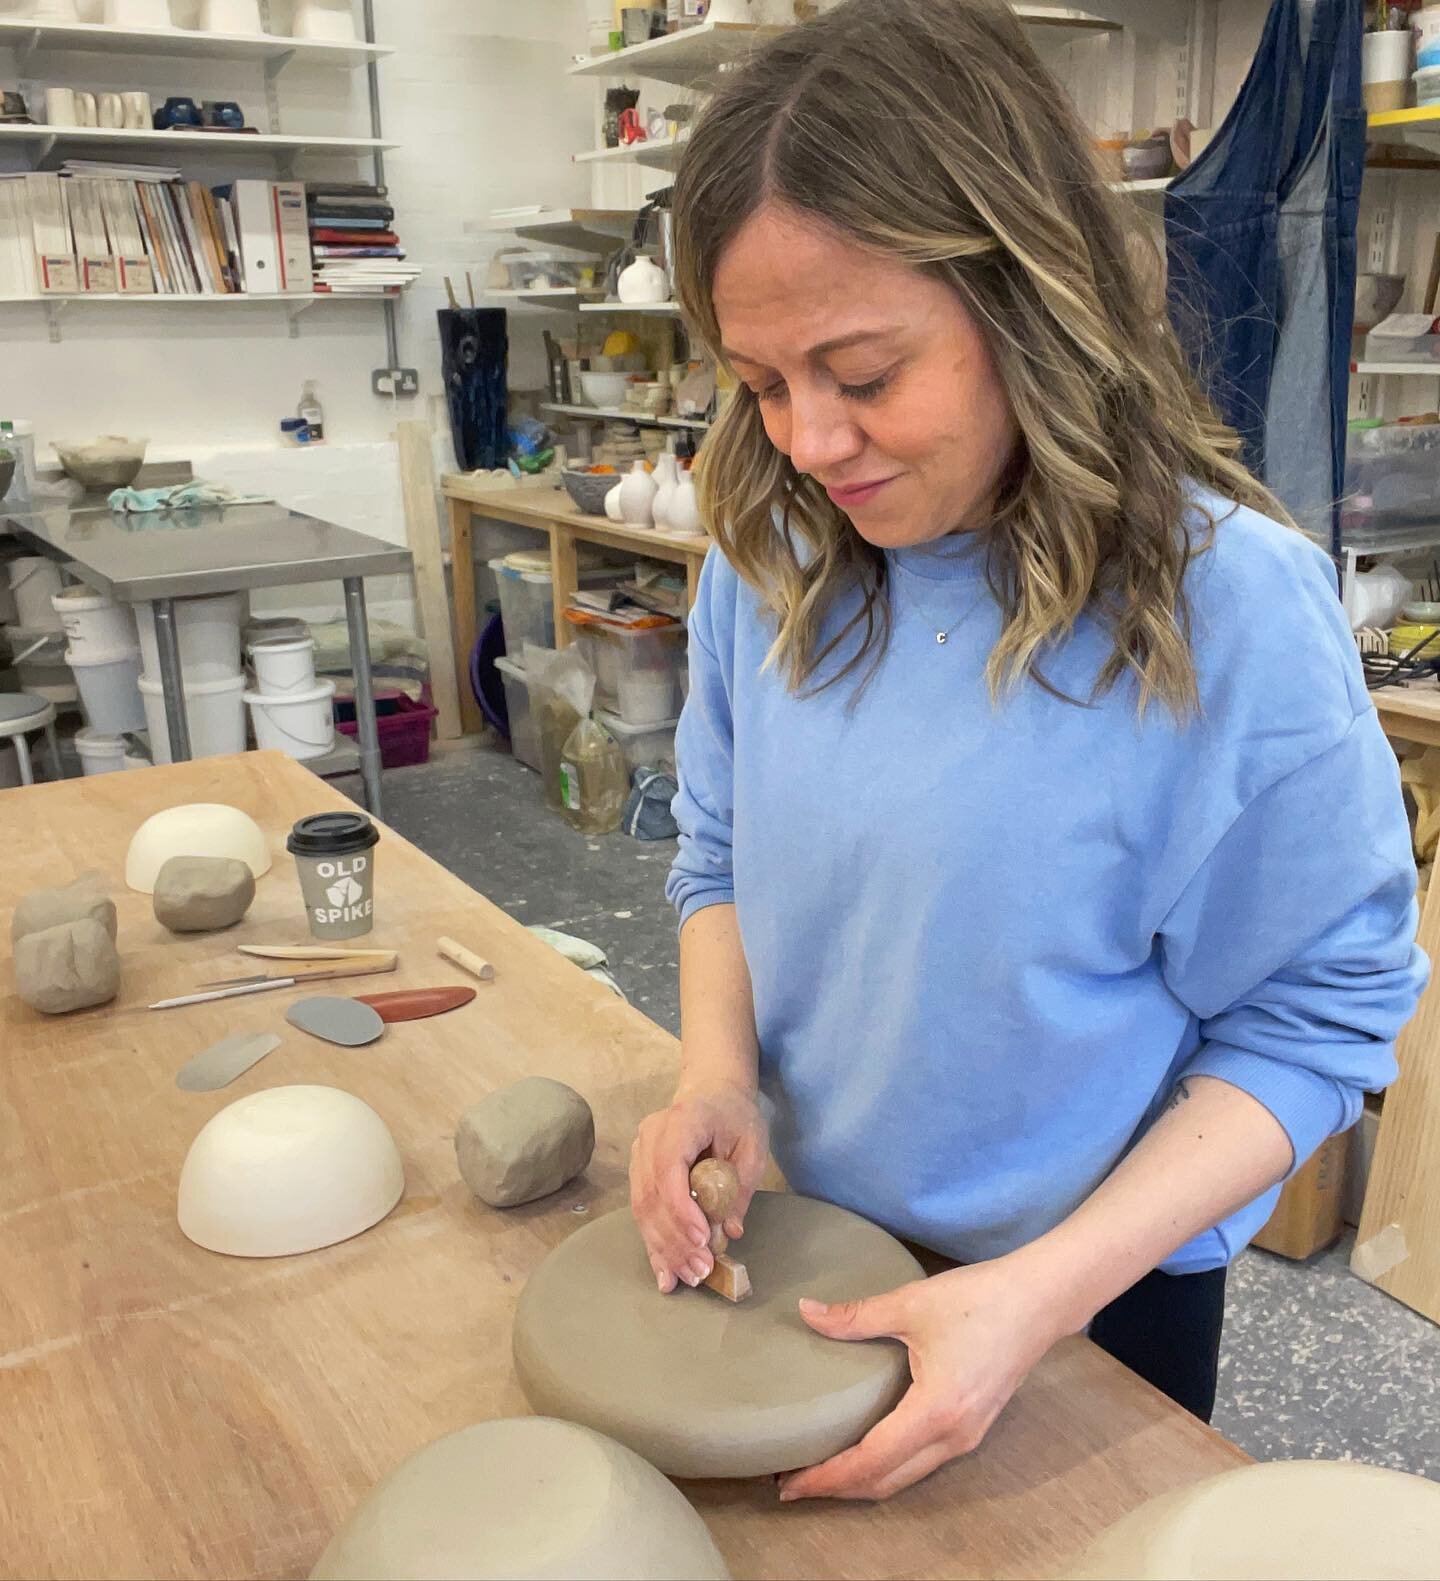 &bull;&bull;ABOUT⁣&bull;&bull;
⁣
I&rsquo;ve had a wee flurry of followers recently, and so I thought it was a good time to say hello &amp; show the face behind @cp_ceramics! 
⁣
&bull; My name is Clare, and I&rsquo;m an architect day-to-day. I work in